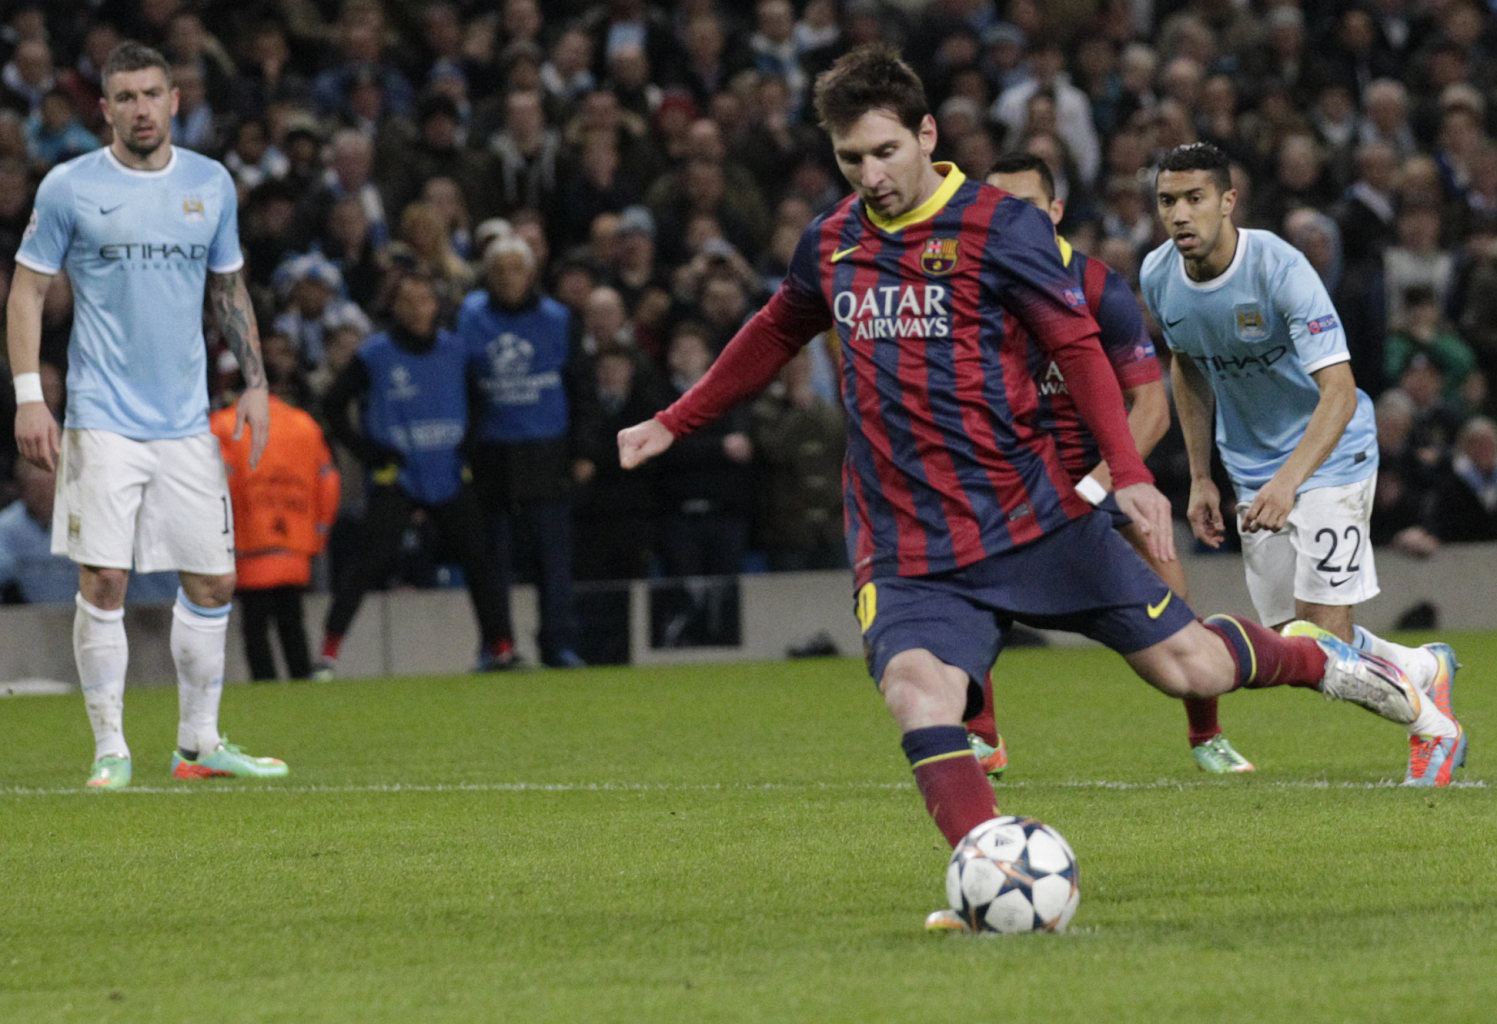 Lionel Messi scoring from the penalty-kick spot